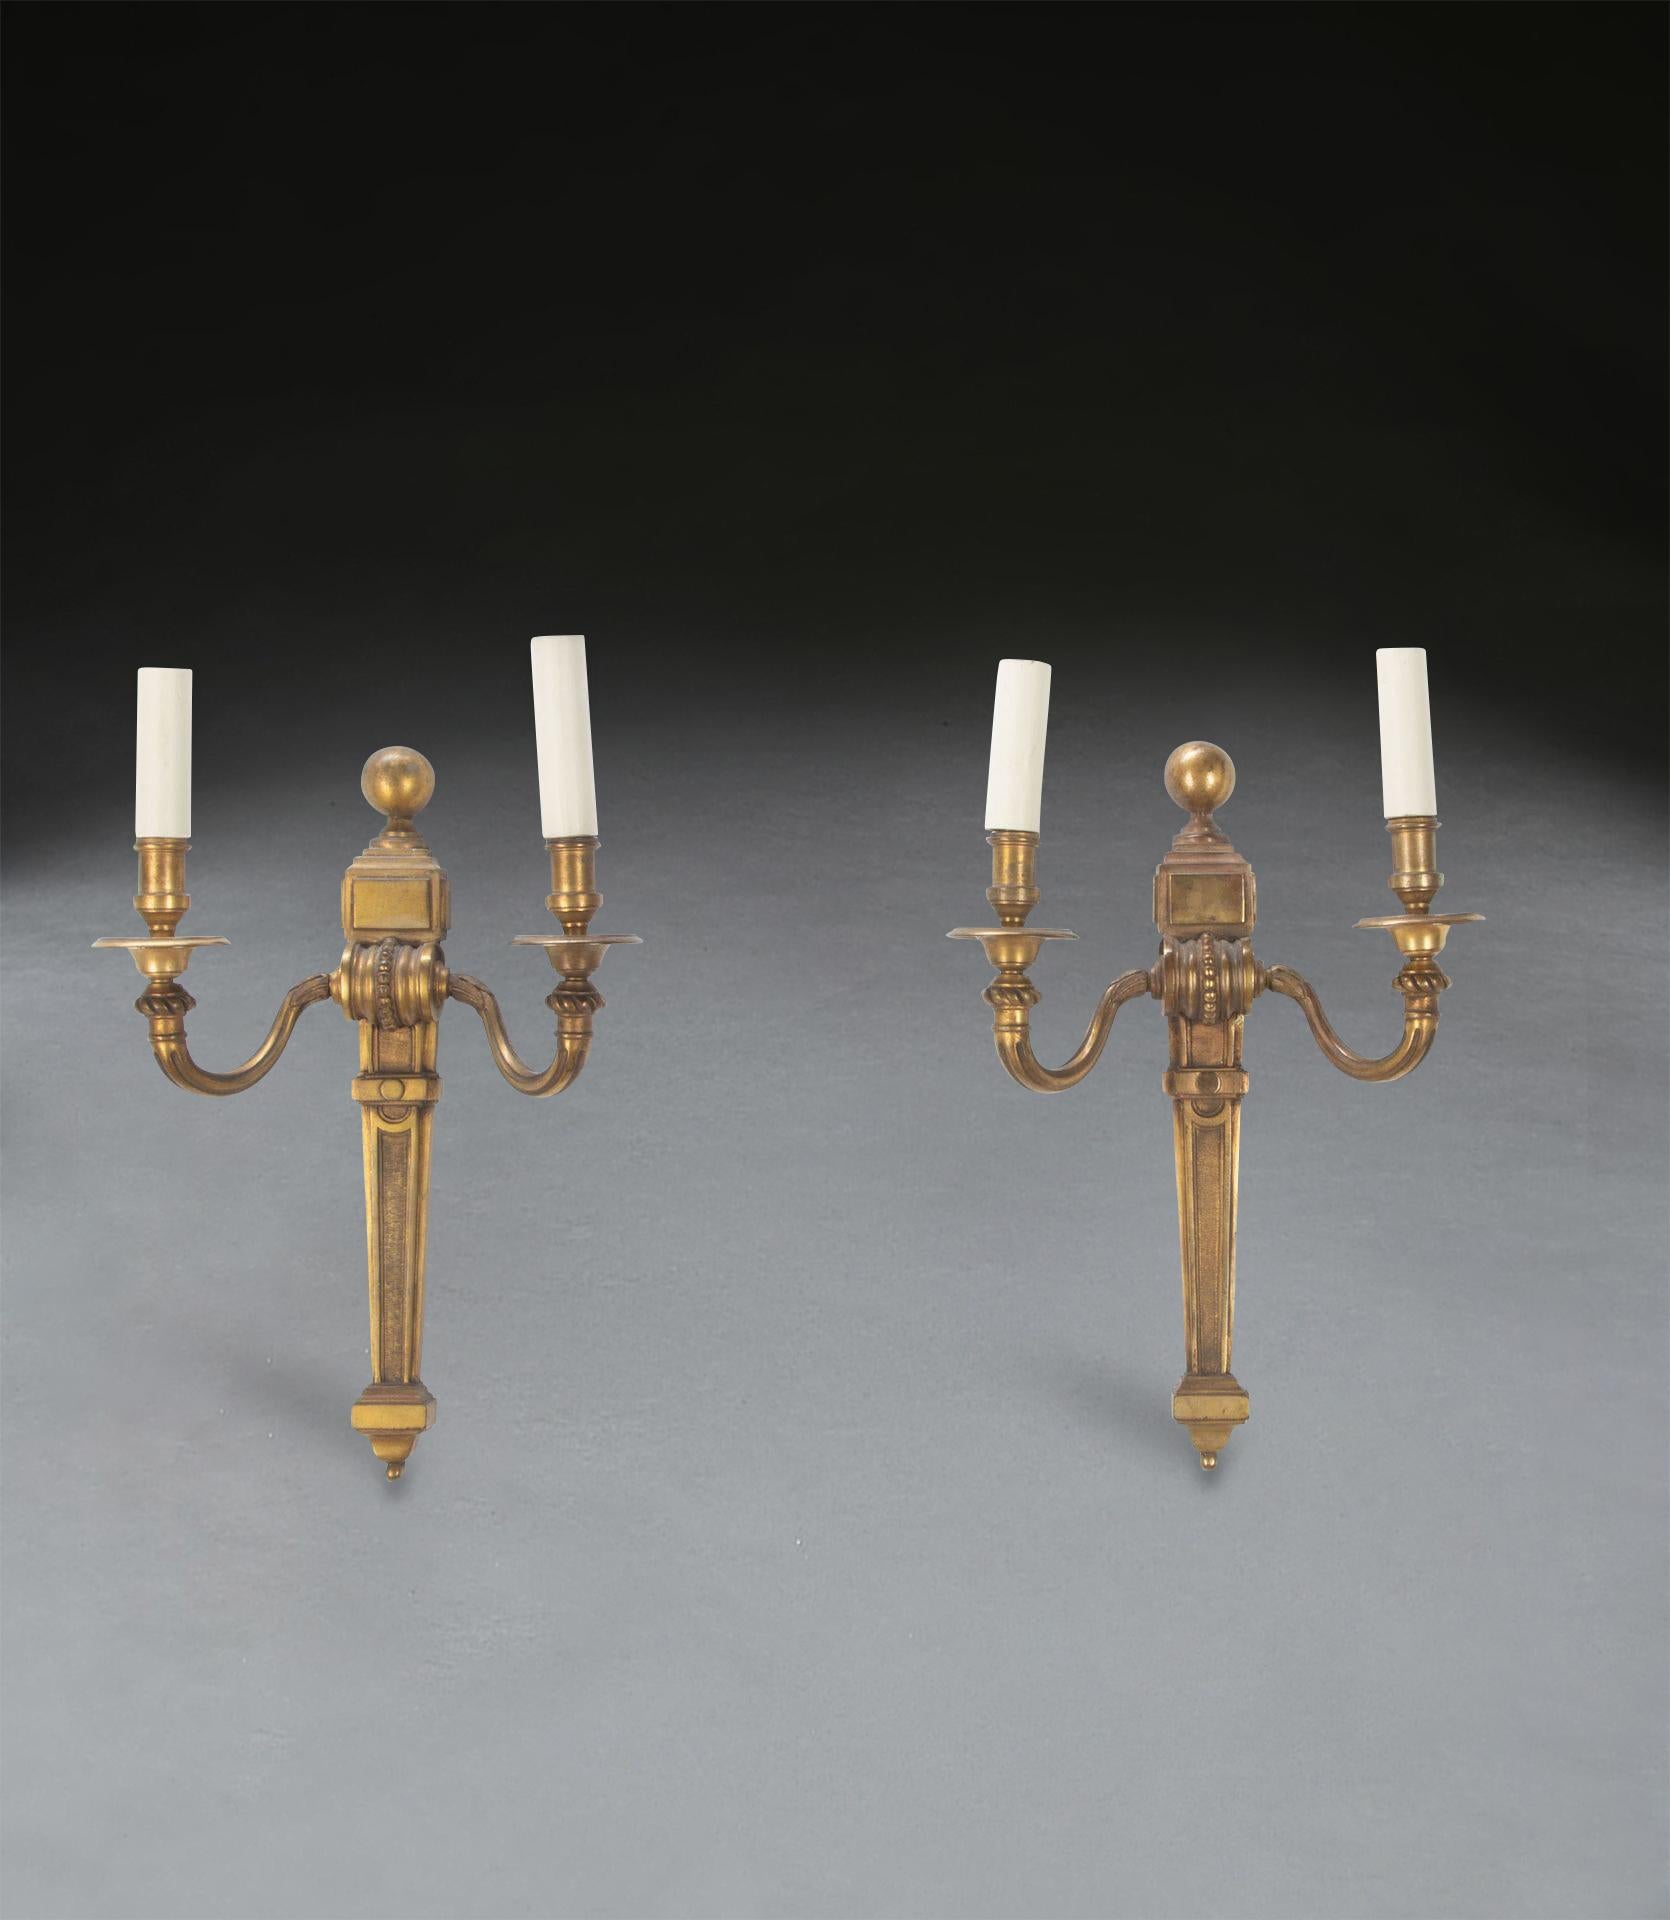 A classical pair of 19th Century ormolu wall lights, the scroll twin branches with tapering pilaster bodies. Circa 1840. In good condition with no twists to the scones or damage. Lamp holders can be adjusted to be straight.

H: 40 cm (15 3/4